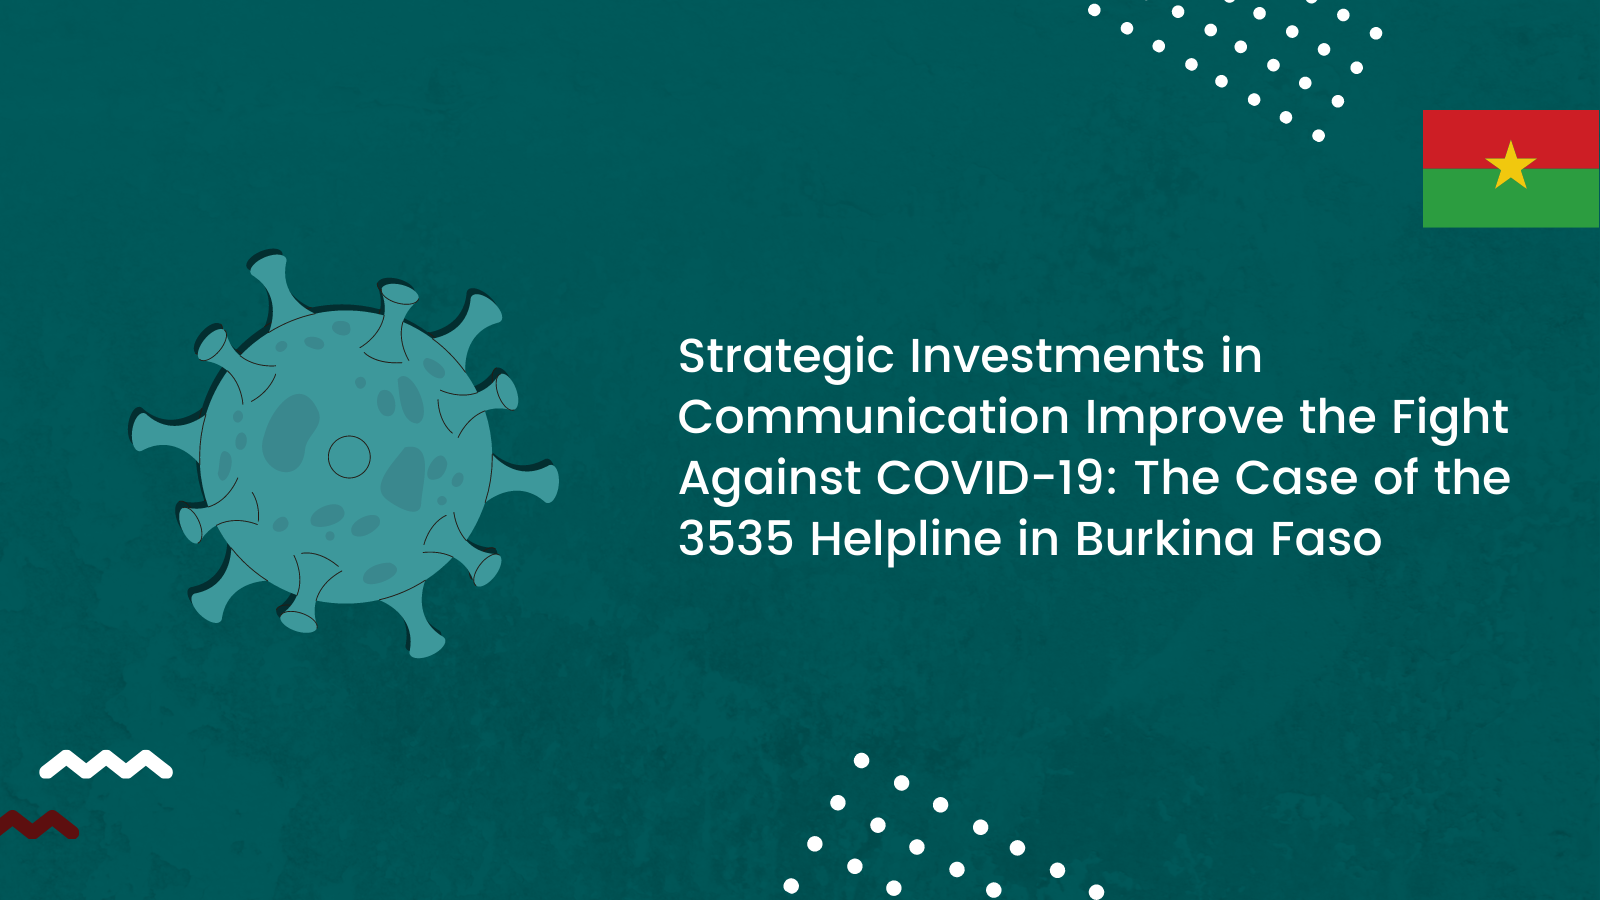 Strategic Investments in Communication Improve the Fight Against COVID-19: The Case of the 3535 Helpline in Burkina Faso